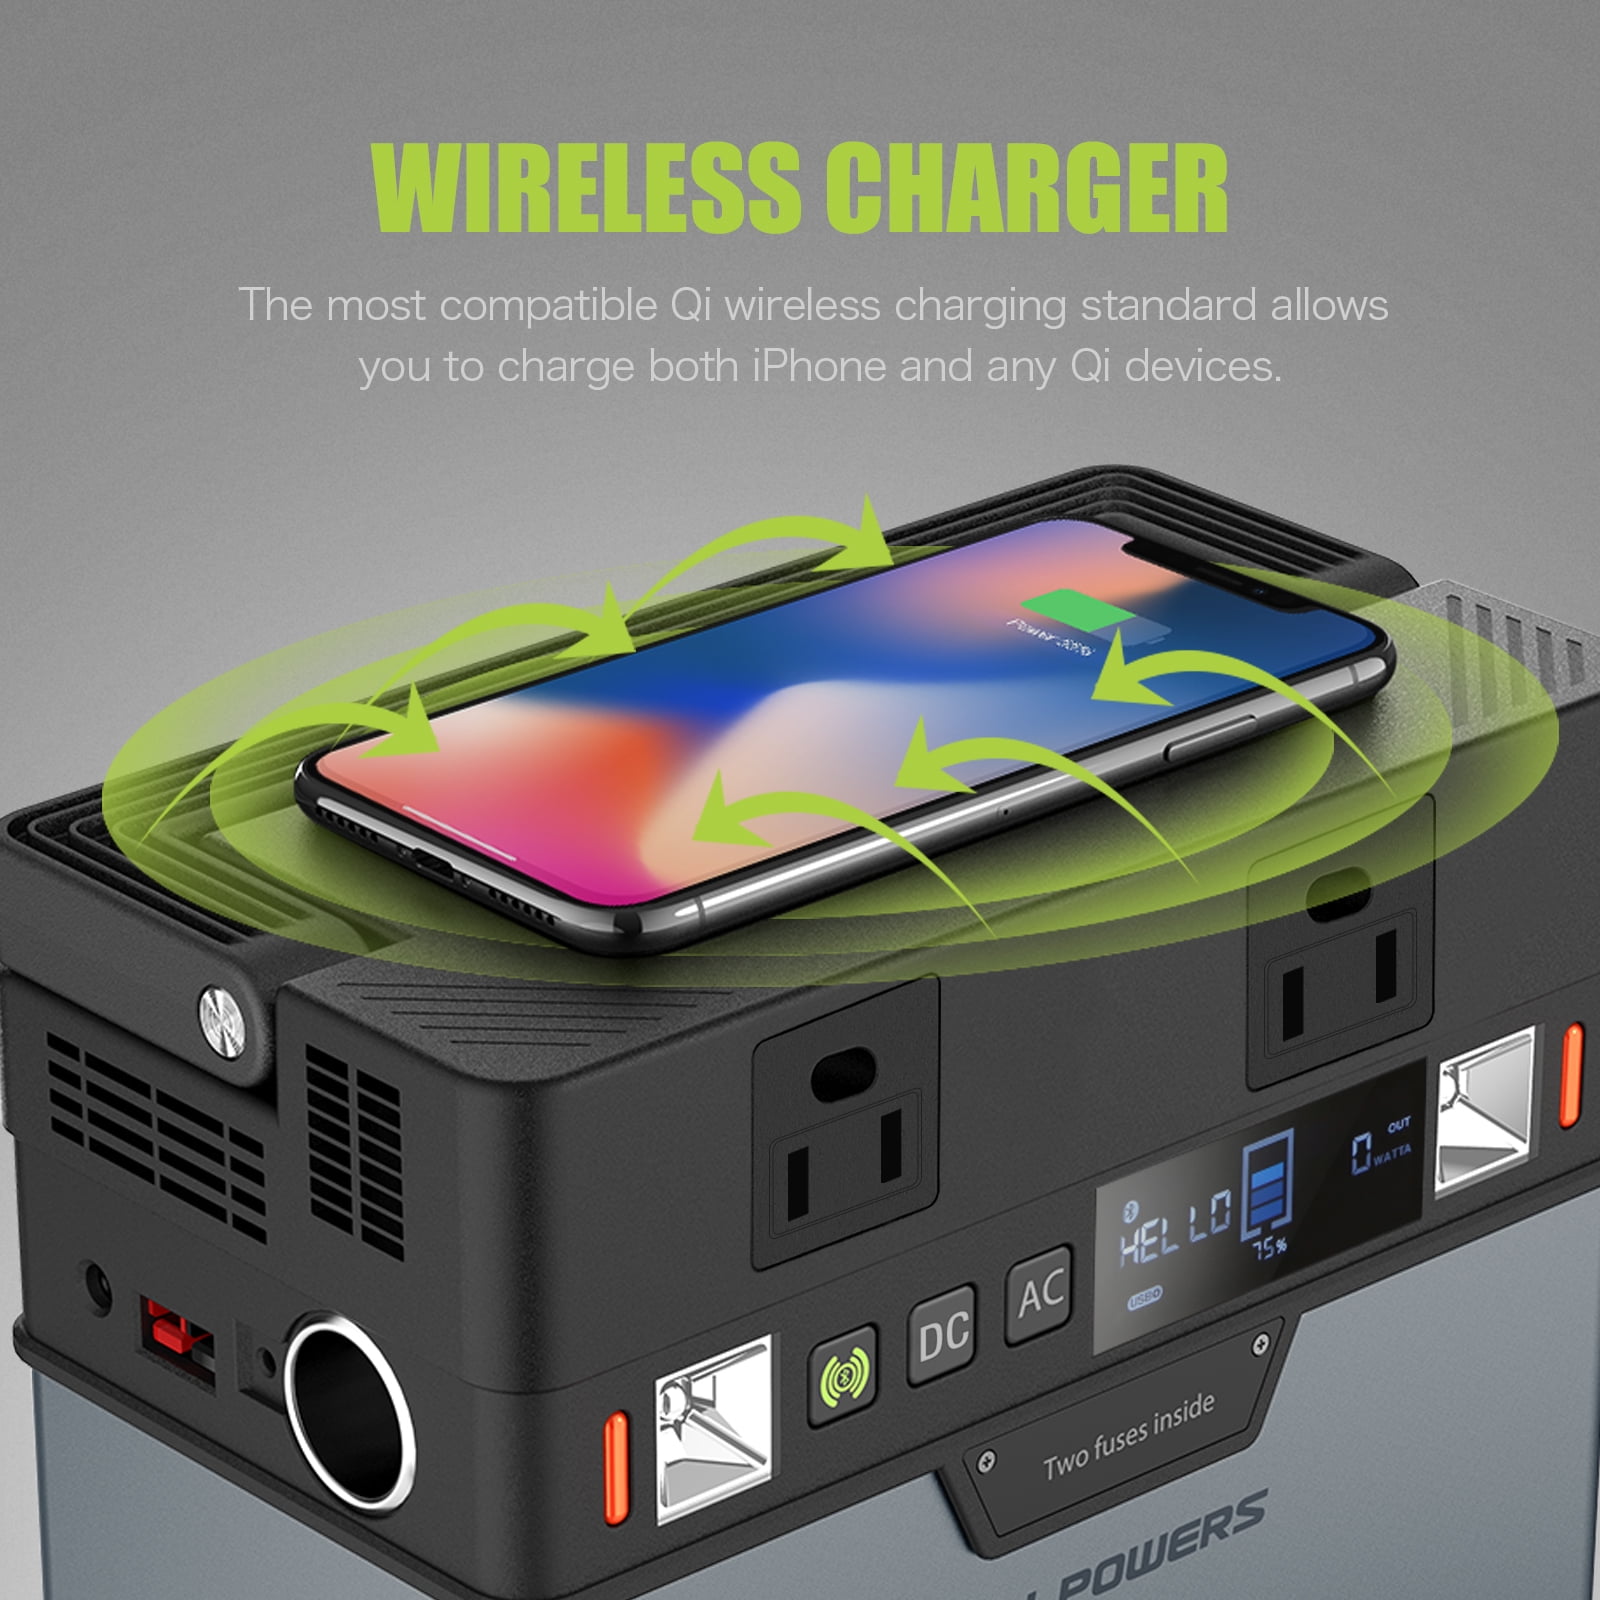 ALLPOWERS S300 Wireless Charging 300W Portable Power Station for